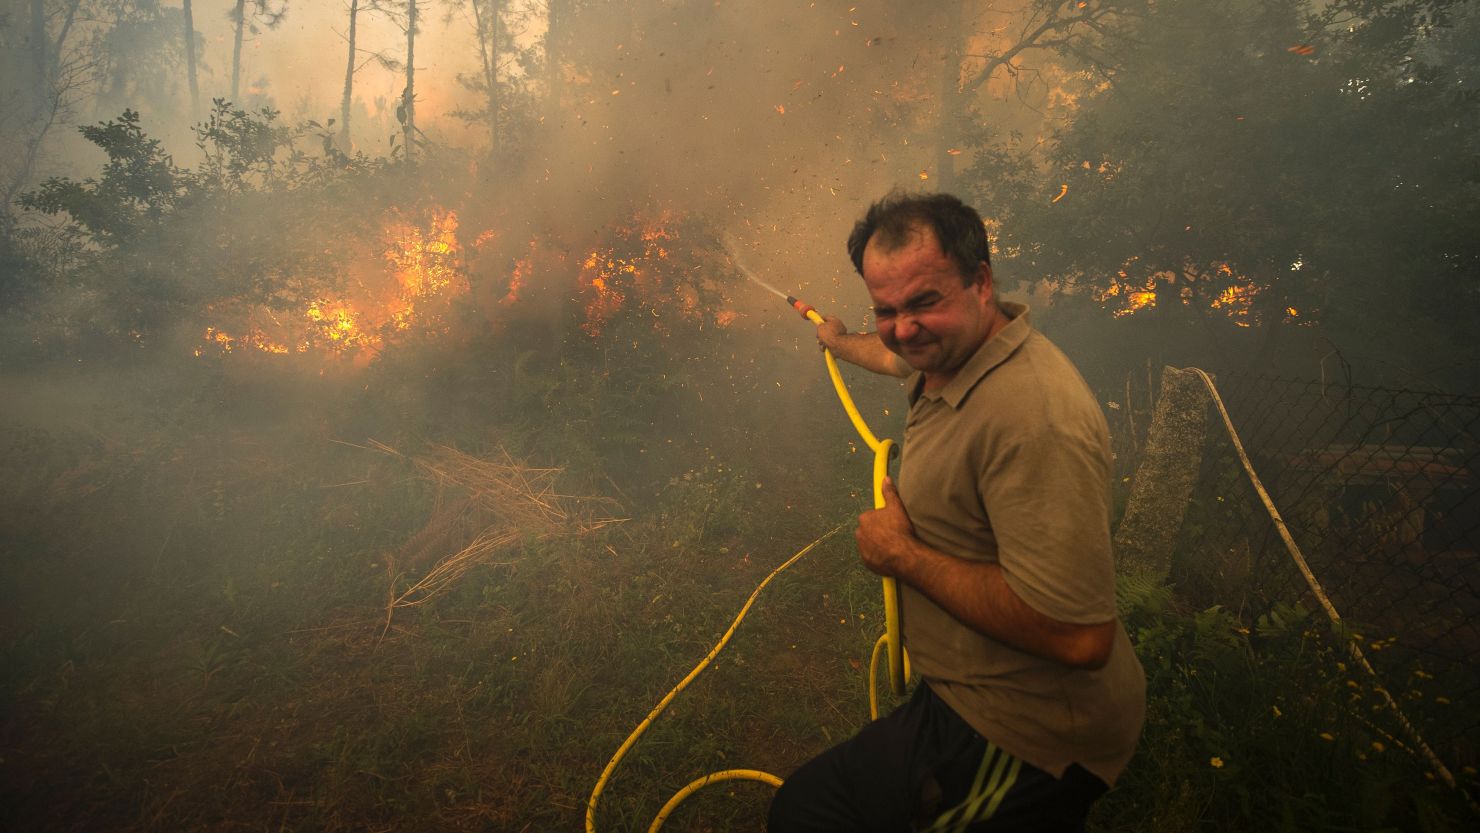 A man fights a wildfire with a garden hose in the Pontevedra region of northwestern Spain Thursday.